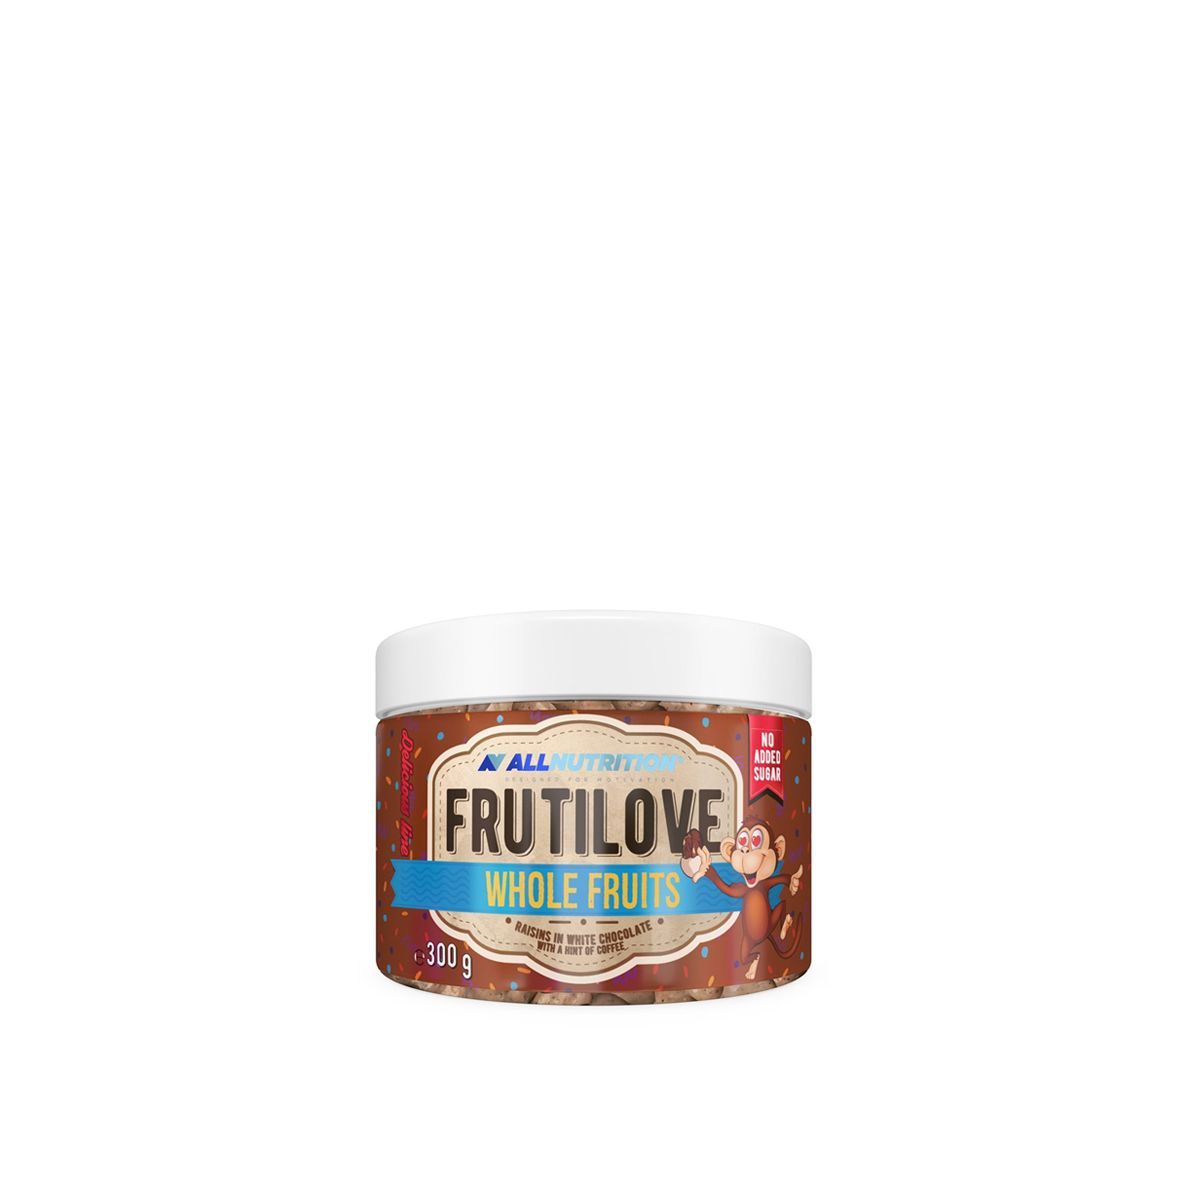 ALLNUTRITION - FRUTILOVE WHOLE FRUITS - RAISINS IN WHITE CHOCOLATE WITH A HINT OF COFFEE - 300 G